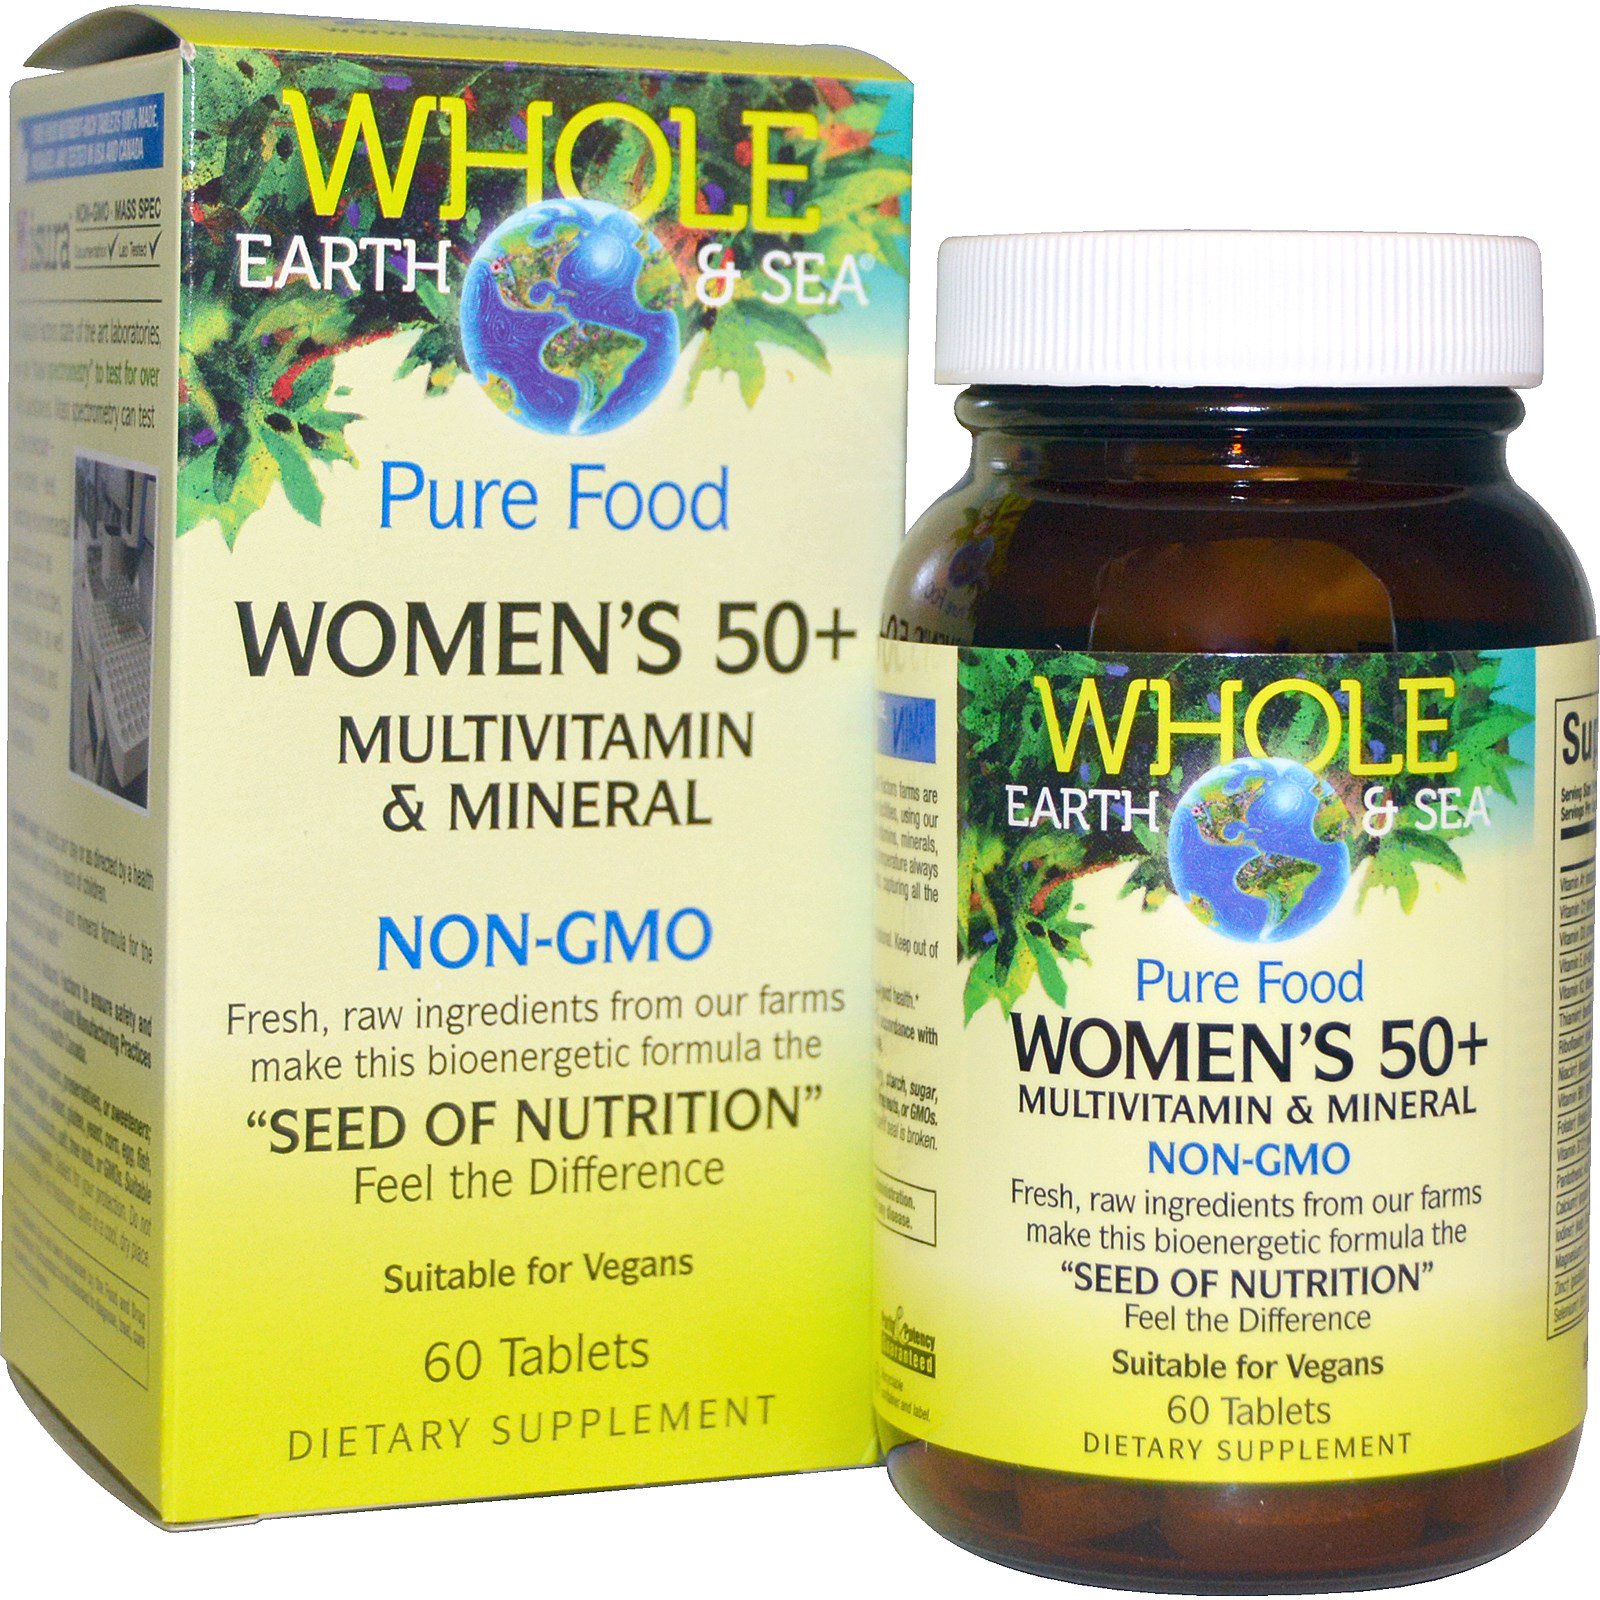 Whole Earth and Sea Women’s 50+ Multivitamin and Mineral 60 tabs